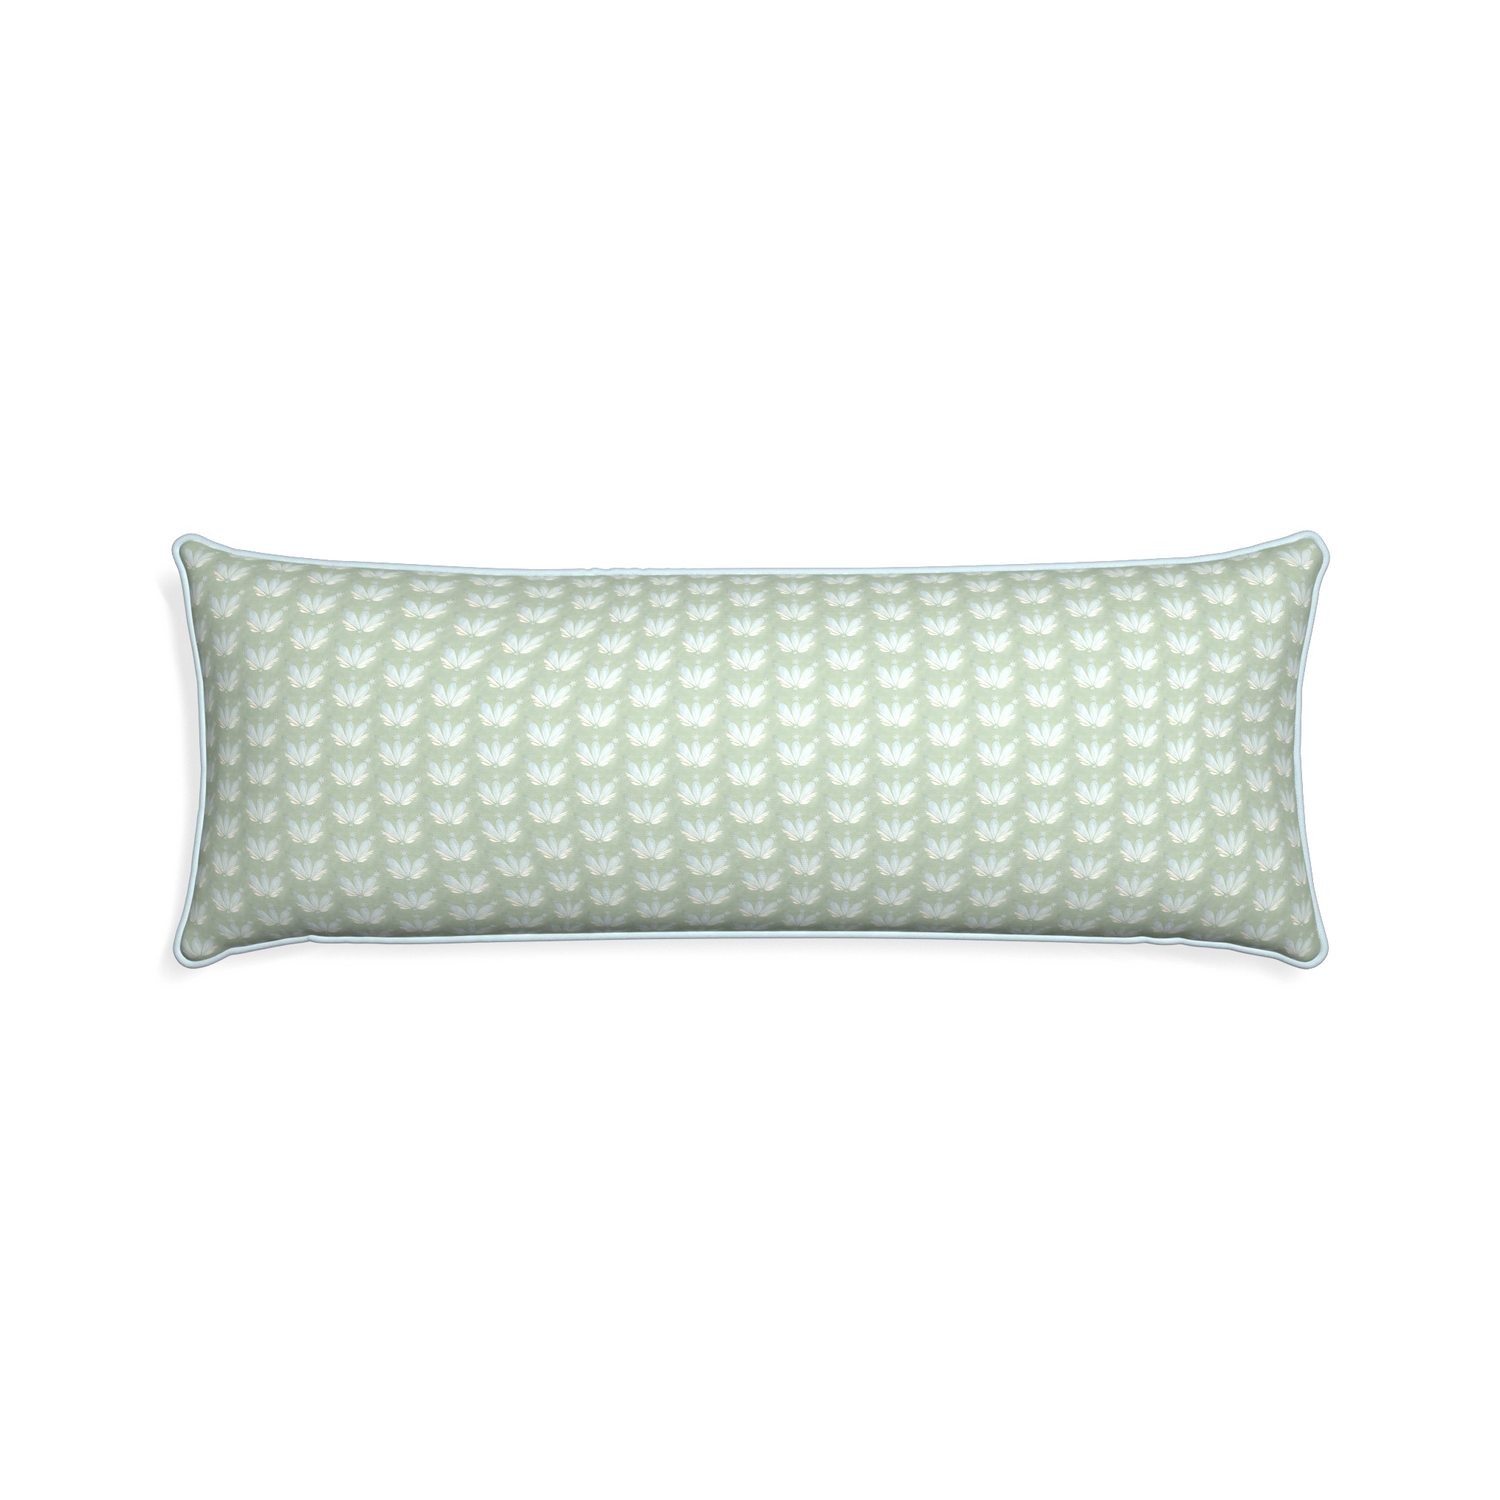 Xl-lumbar serena sea salt custom blue & green floral drop repeatpillow with powder piping on white background